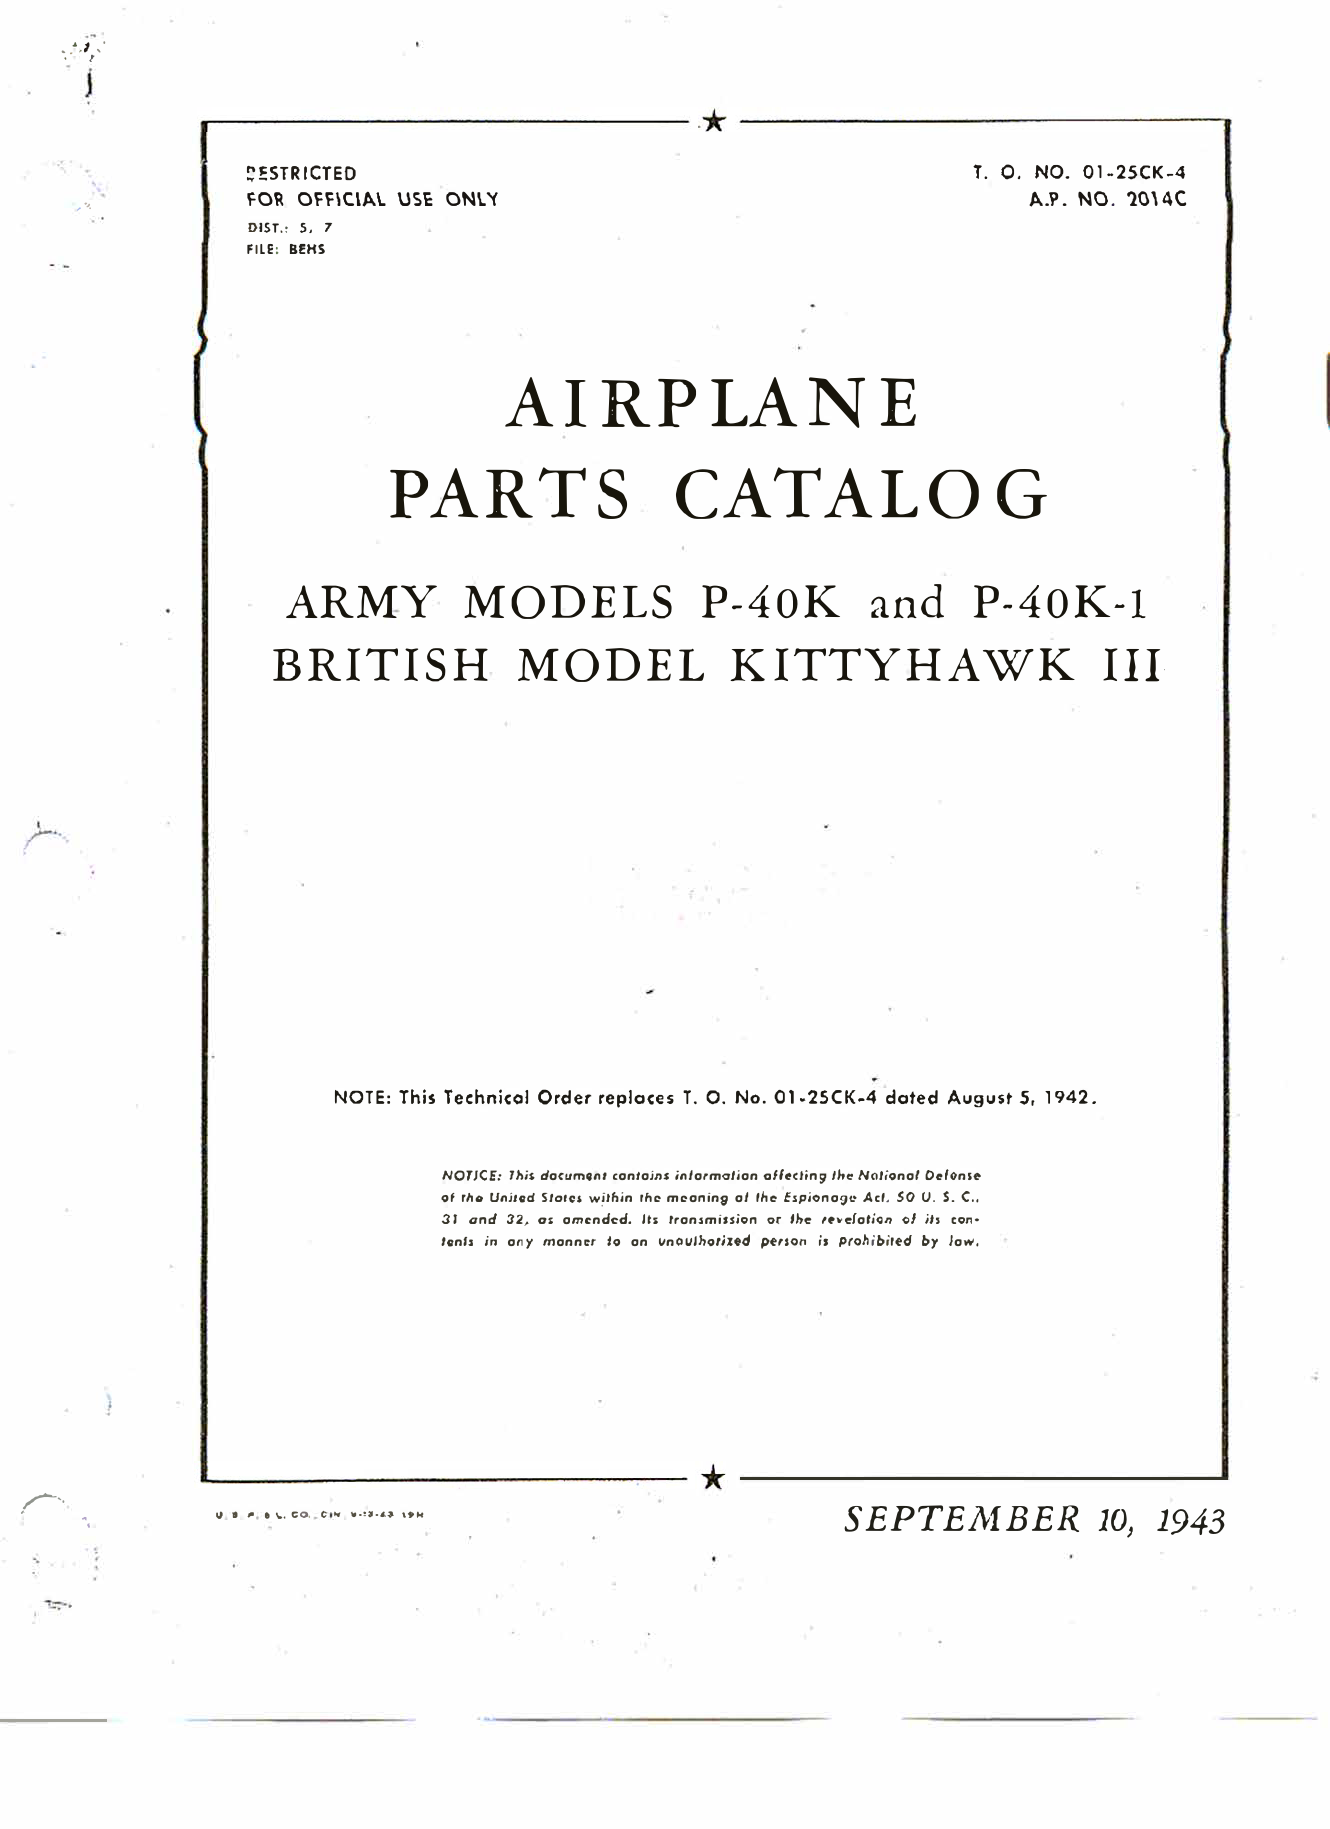 Sample page 1 from AirCorps Library document: Parts Catalog - P-40K